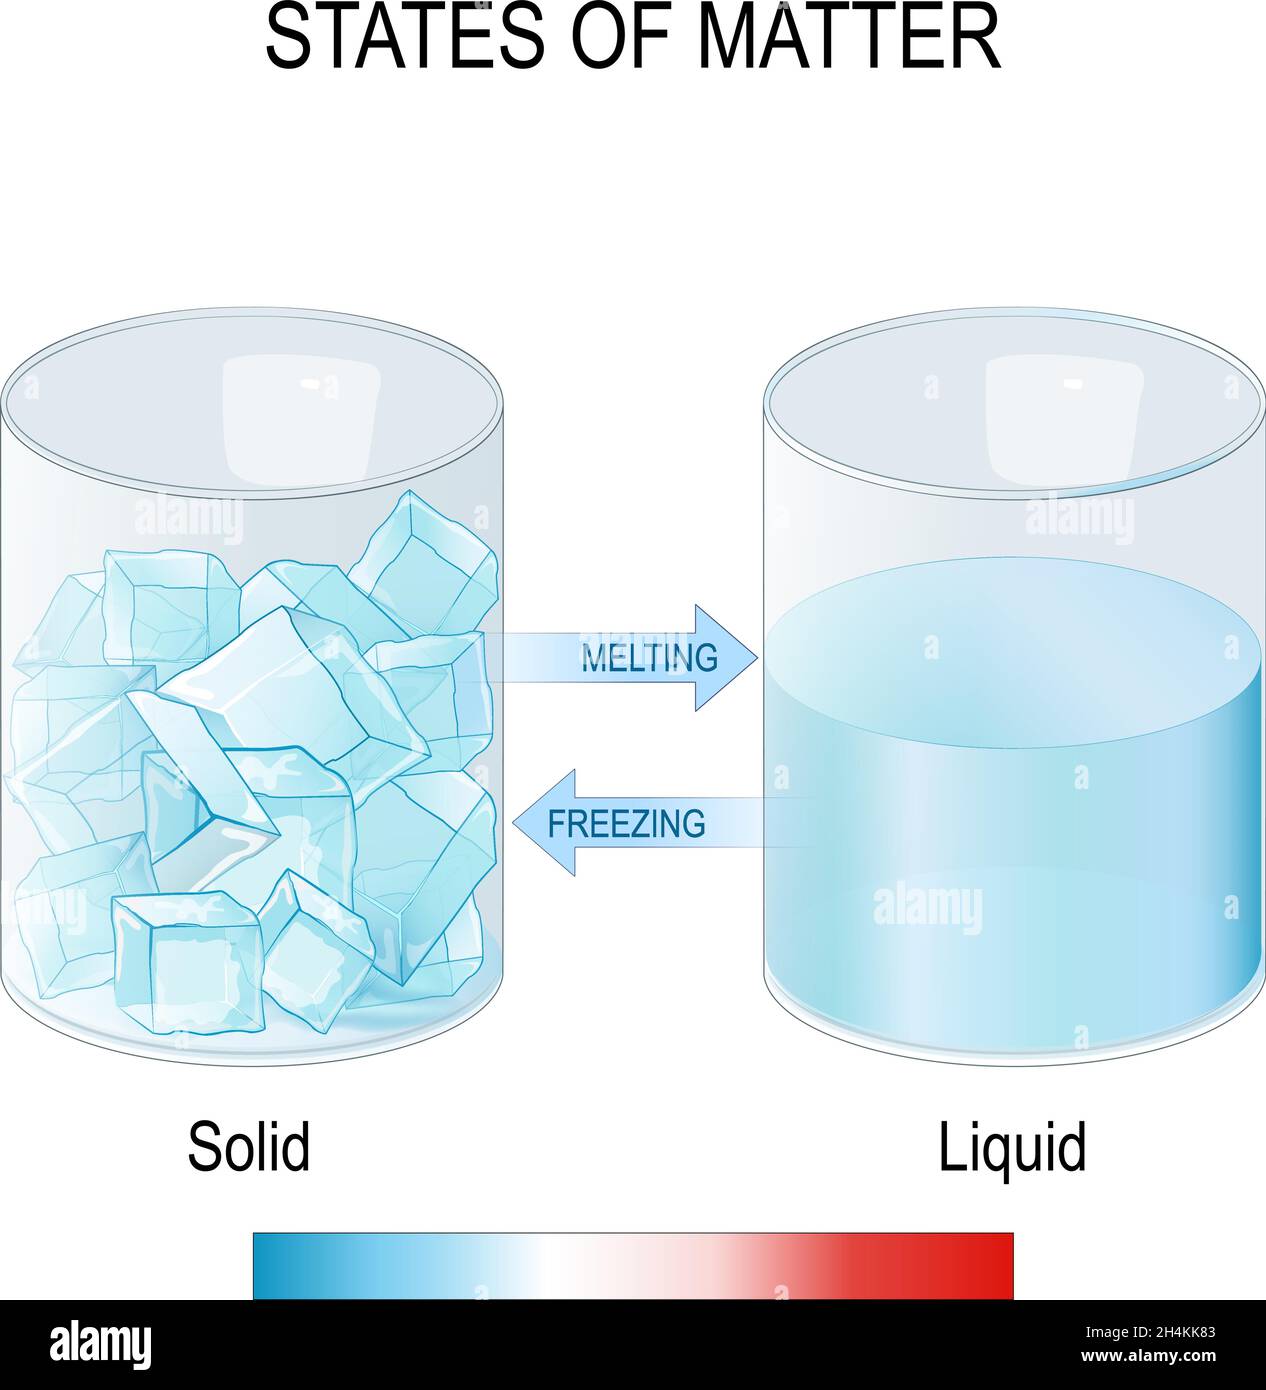 states of matter. Two glasses with ice cubes and water. freezing and melting. liquid and solid. scientific experiment. studying physics or chemistry. Stock Vector